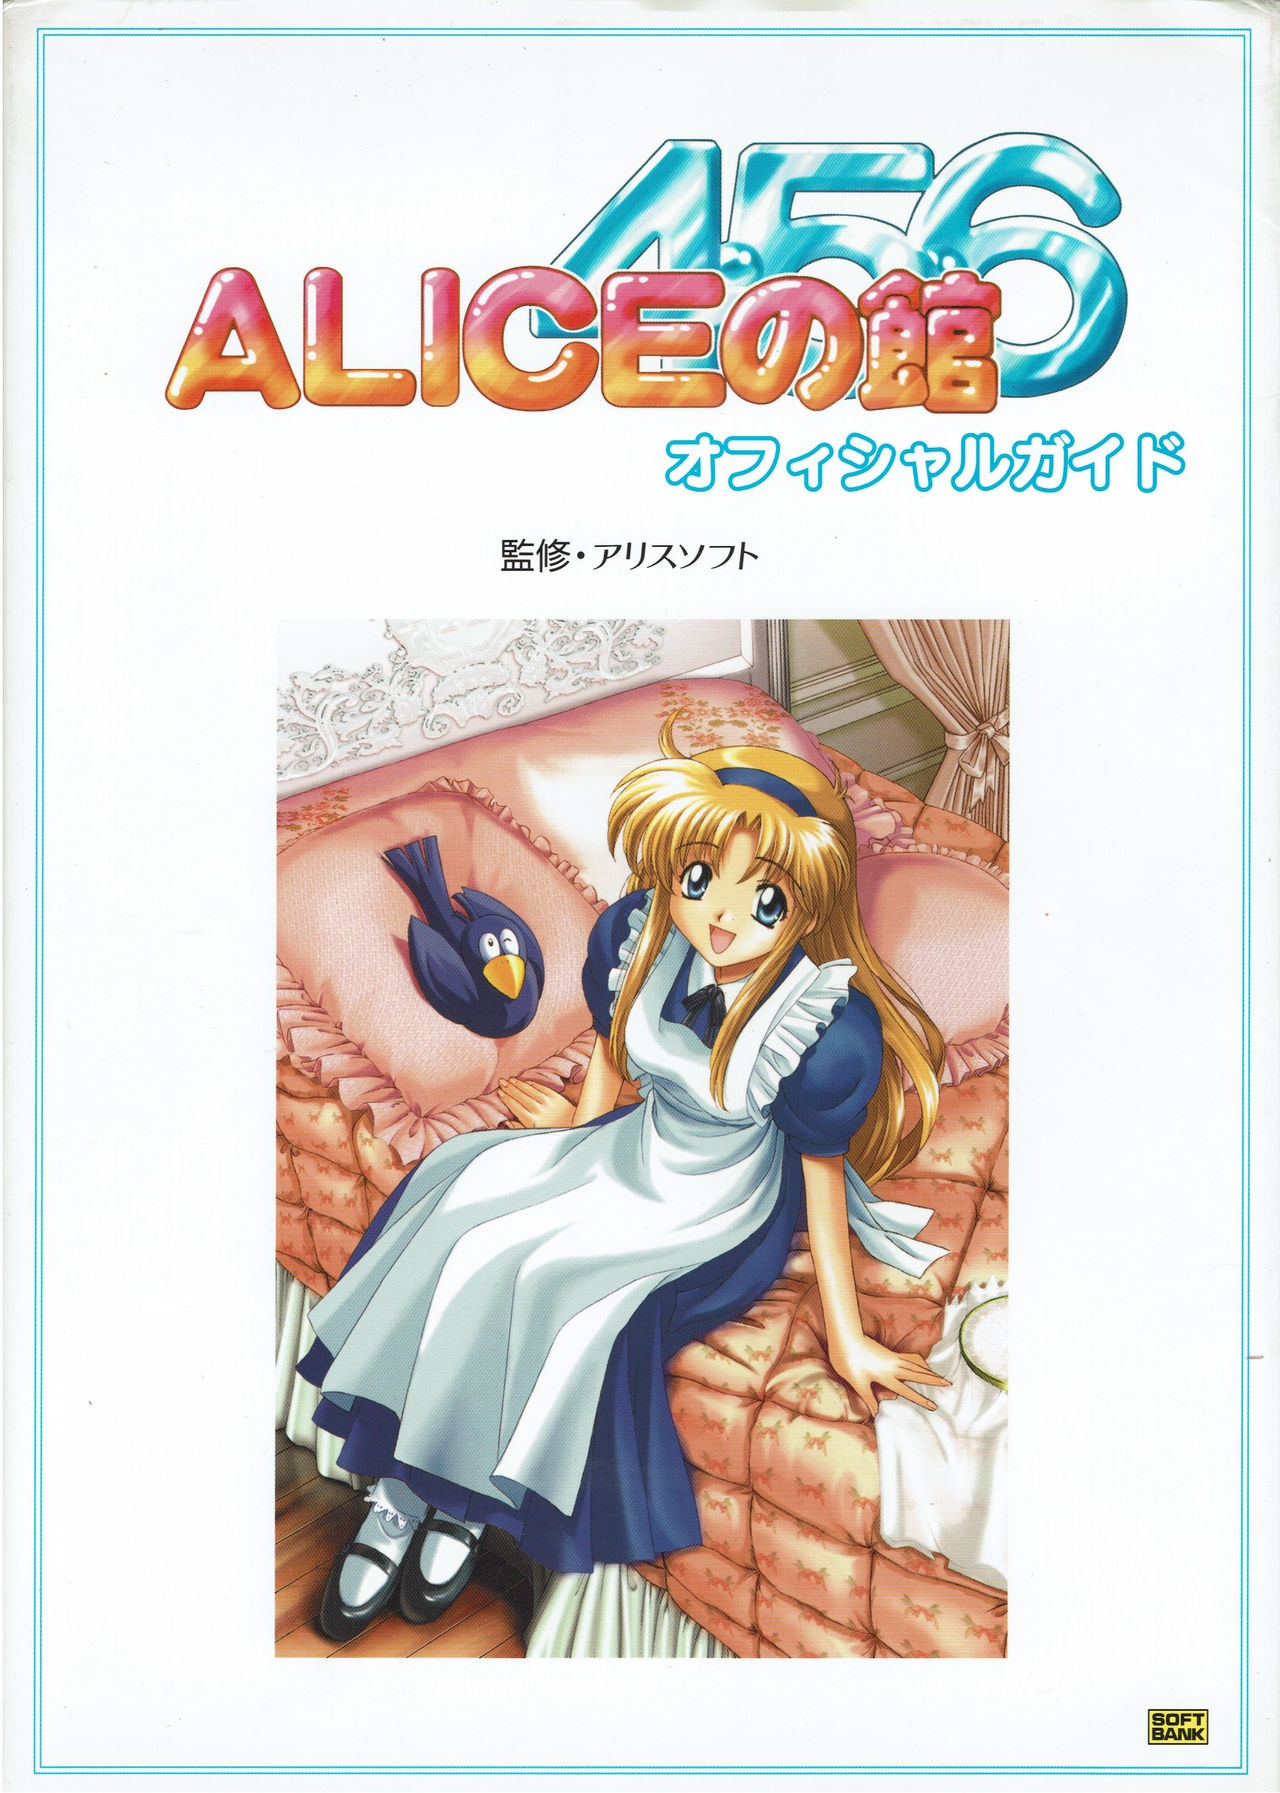 Alice no Yakata 456 Official Guide 0